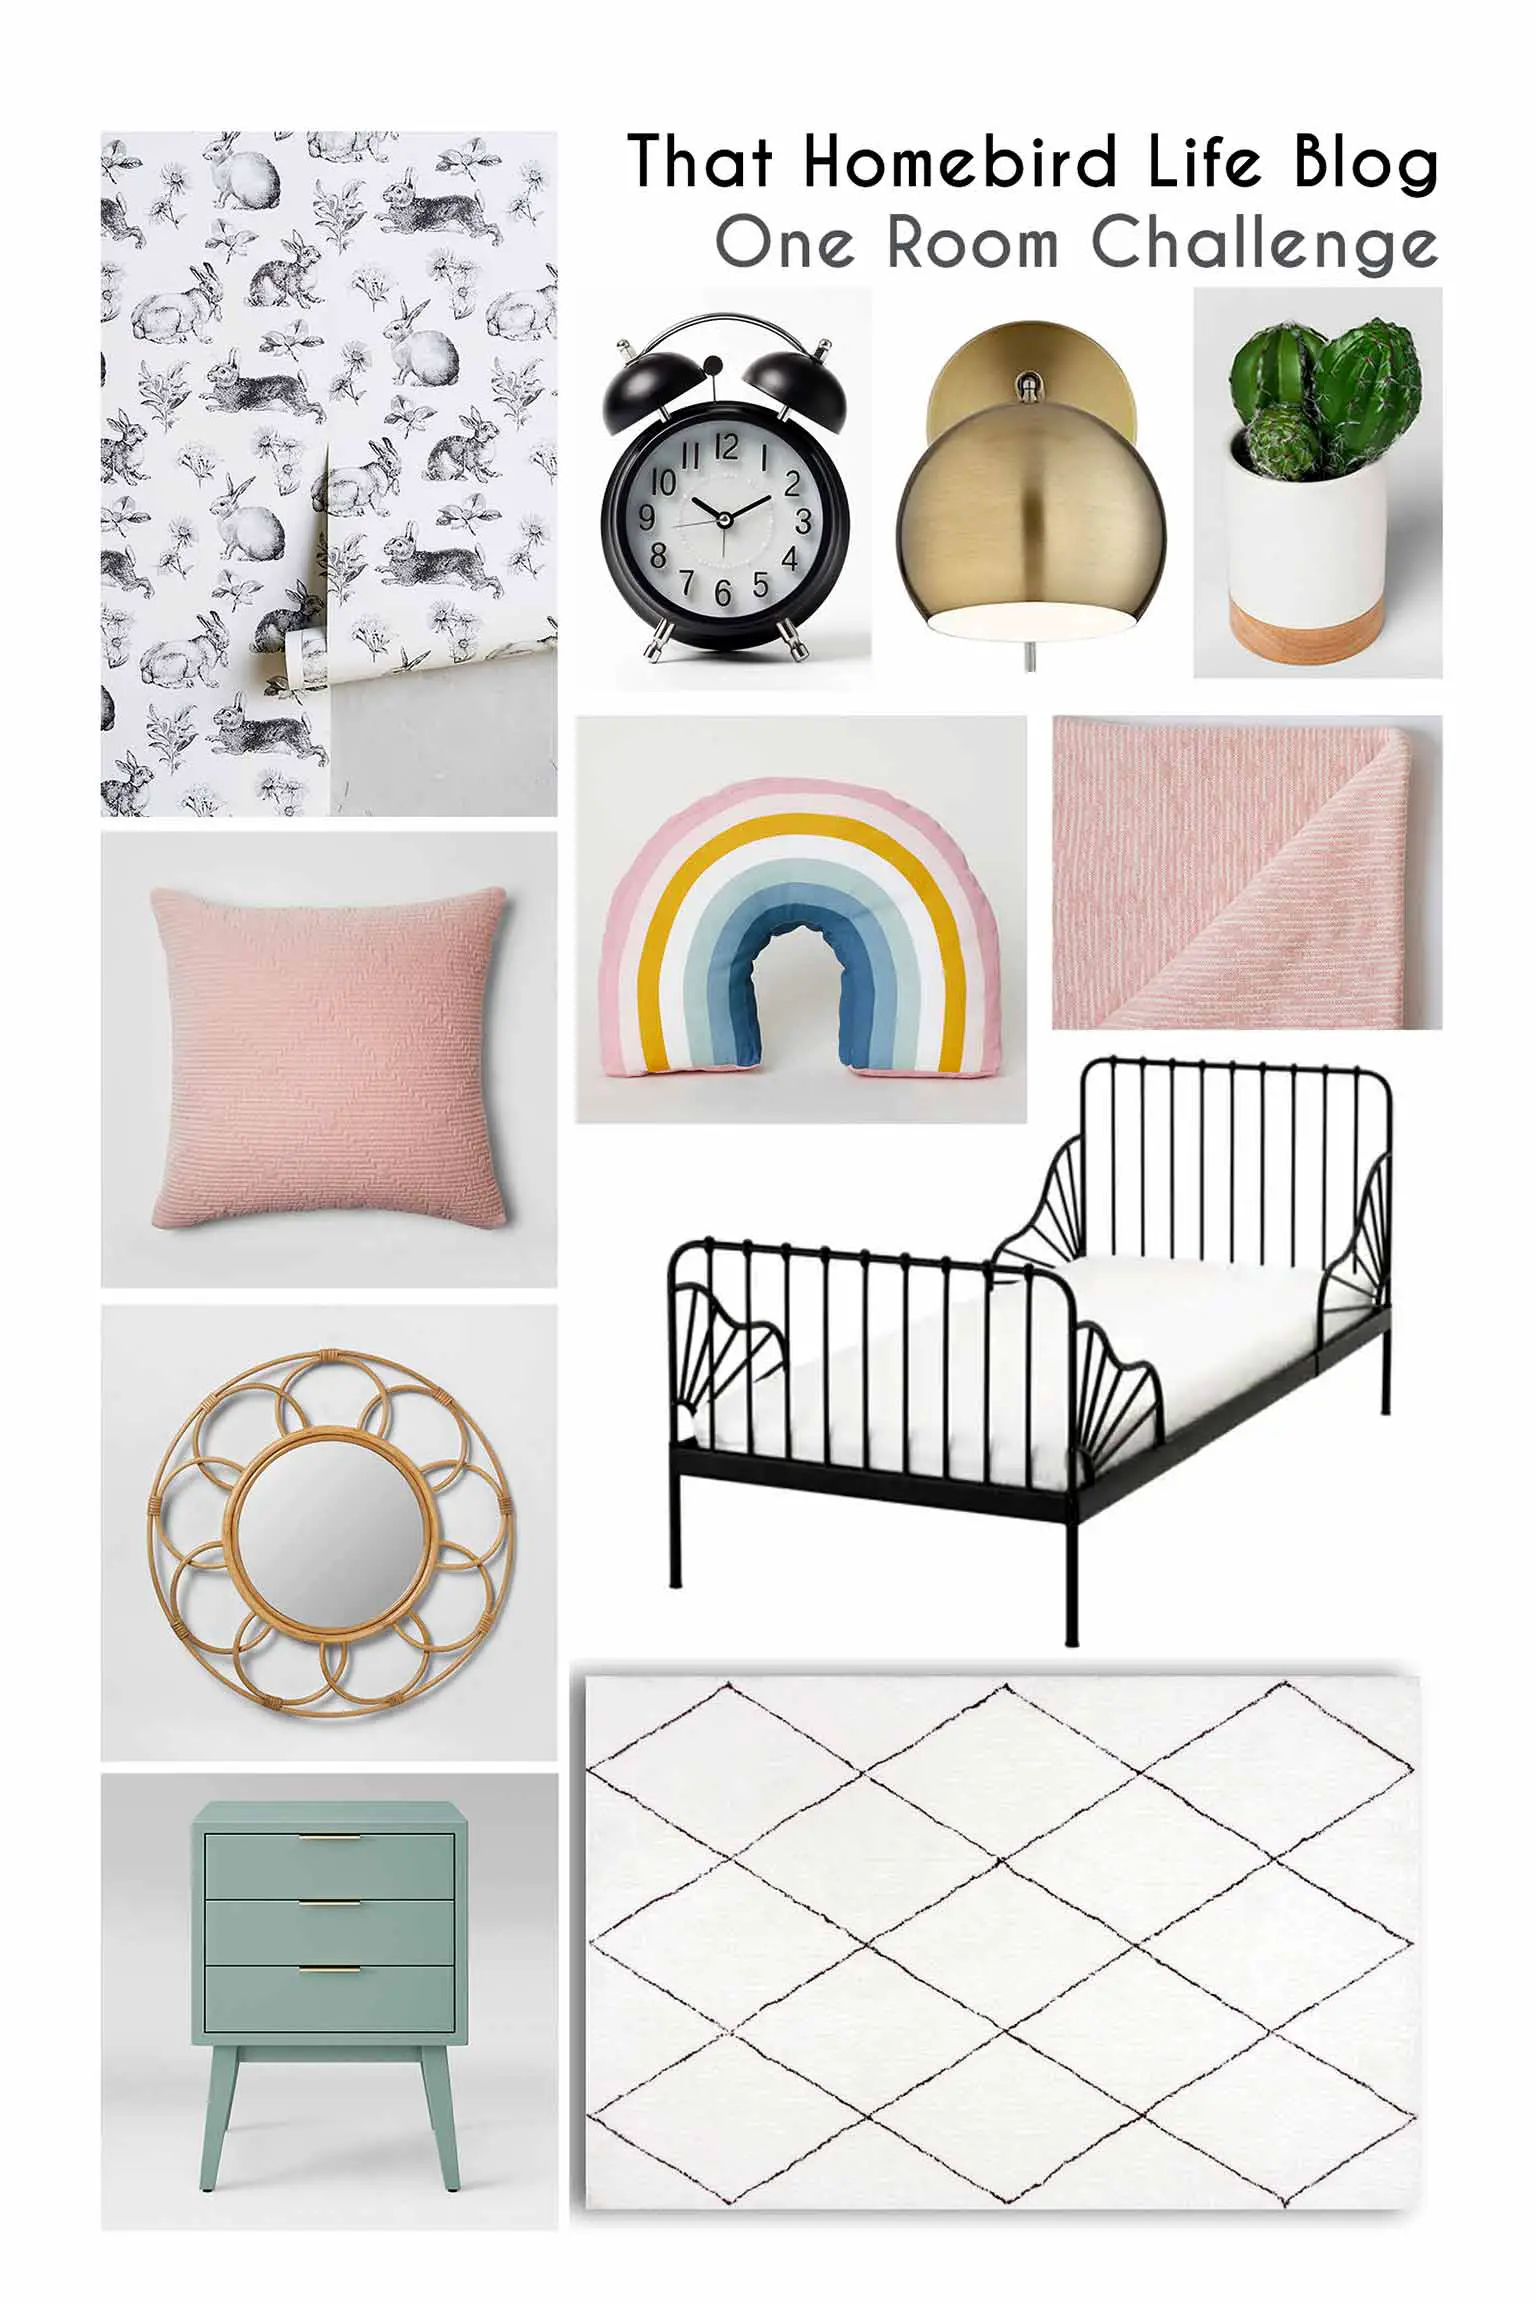 Mood board for Girls' Bedroom - Guest Participant of the One Room Challenge - That Homebird Life Blog